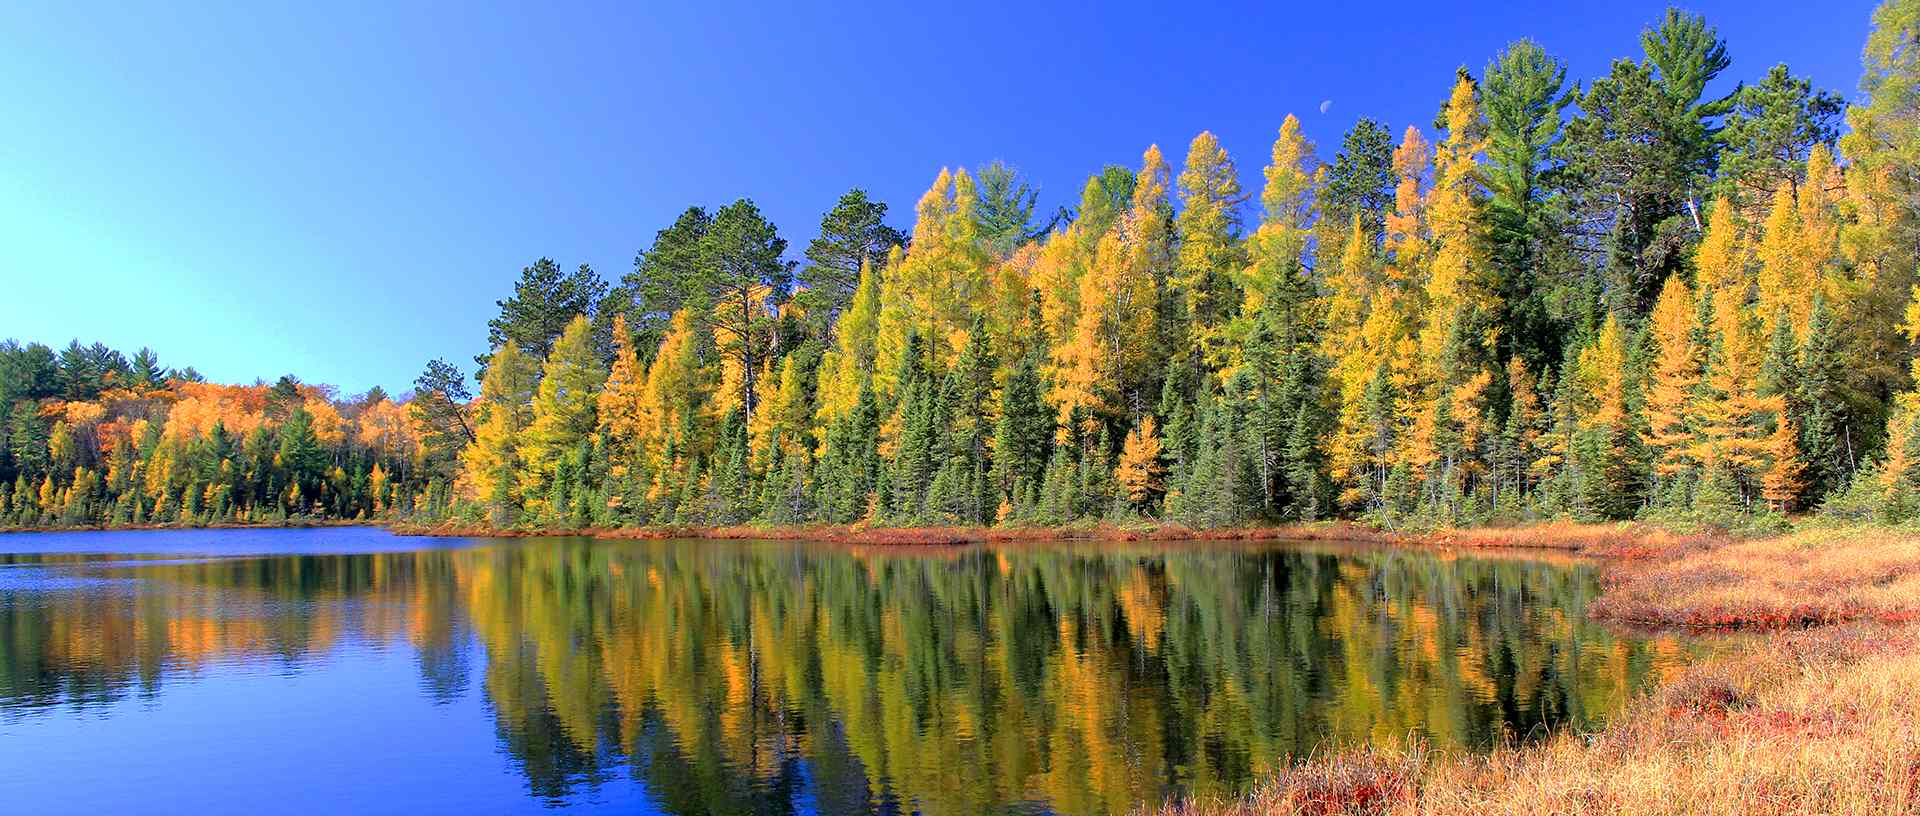 Fall color trees on the lakeside